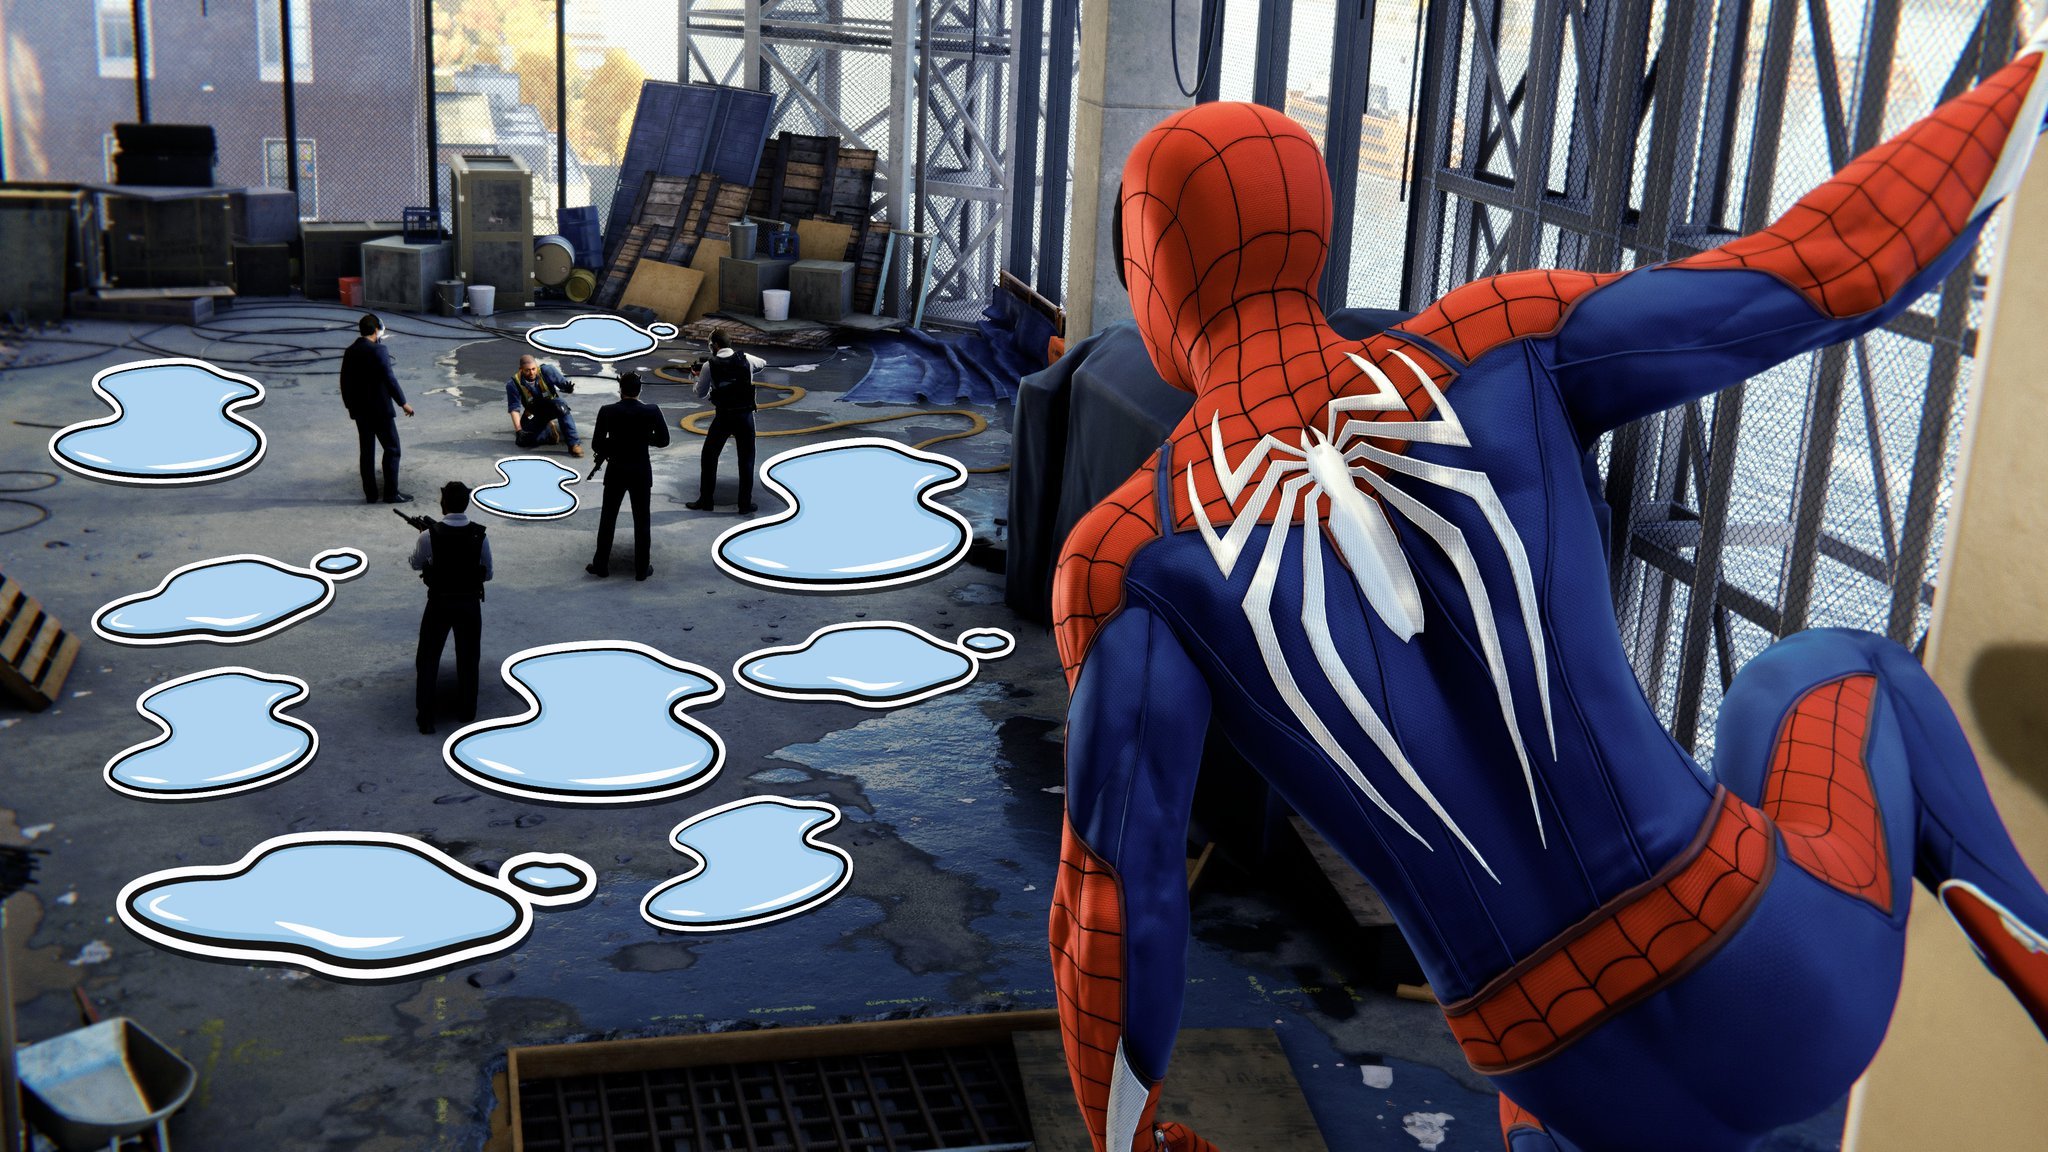 This Week In Gaming Nonsense: Silly Sales, Puddles & More